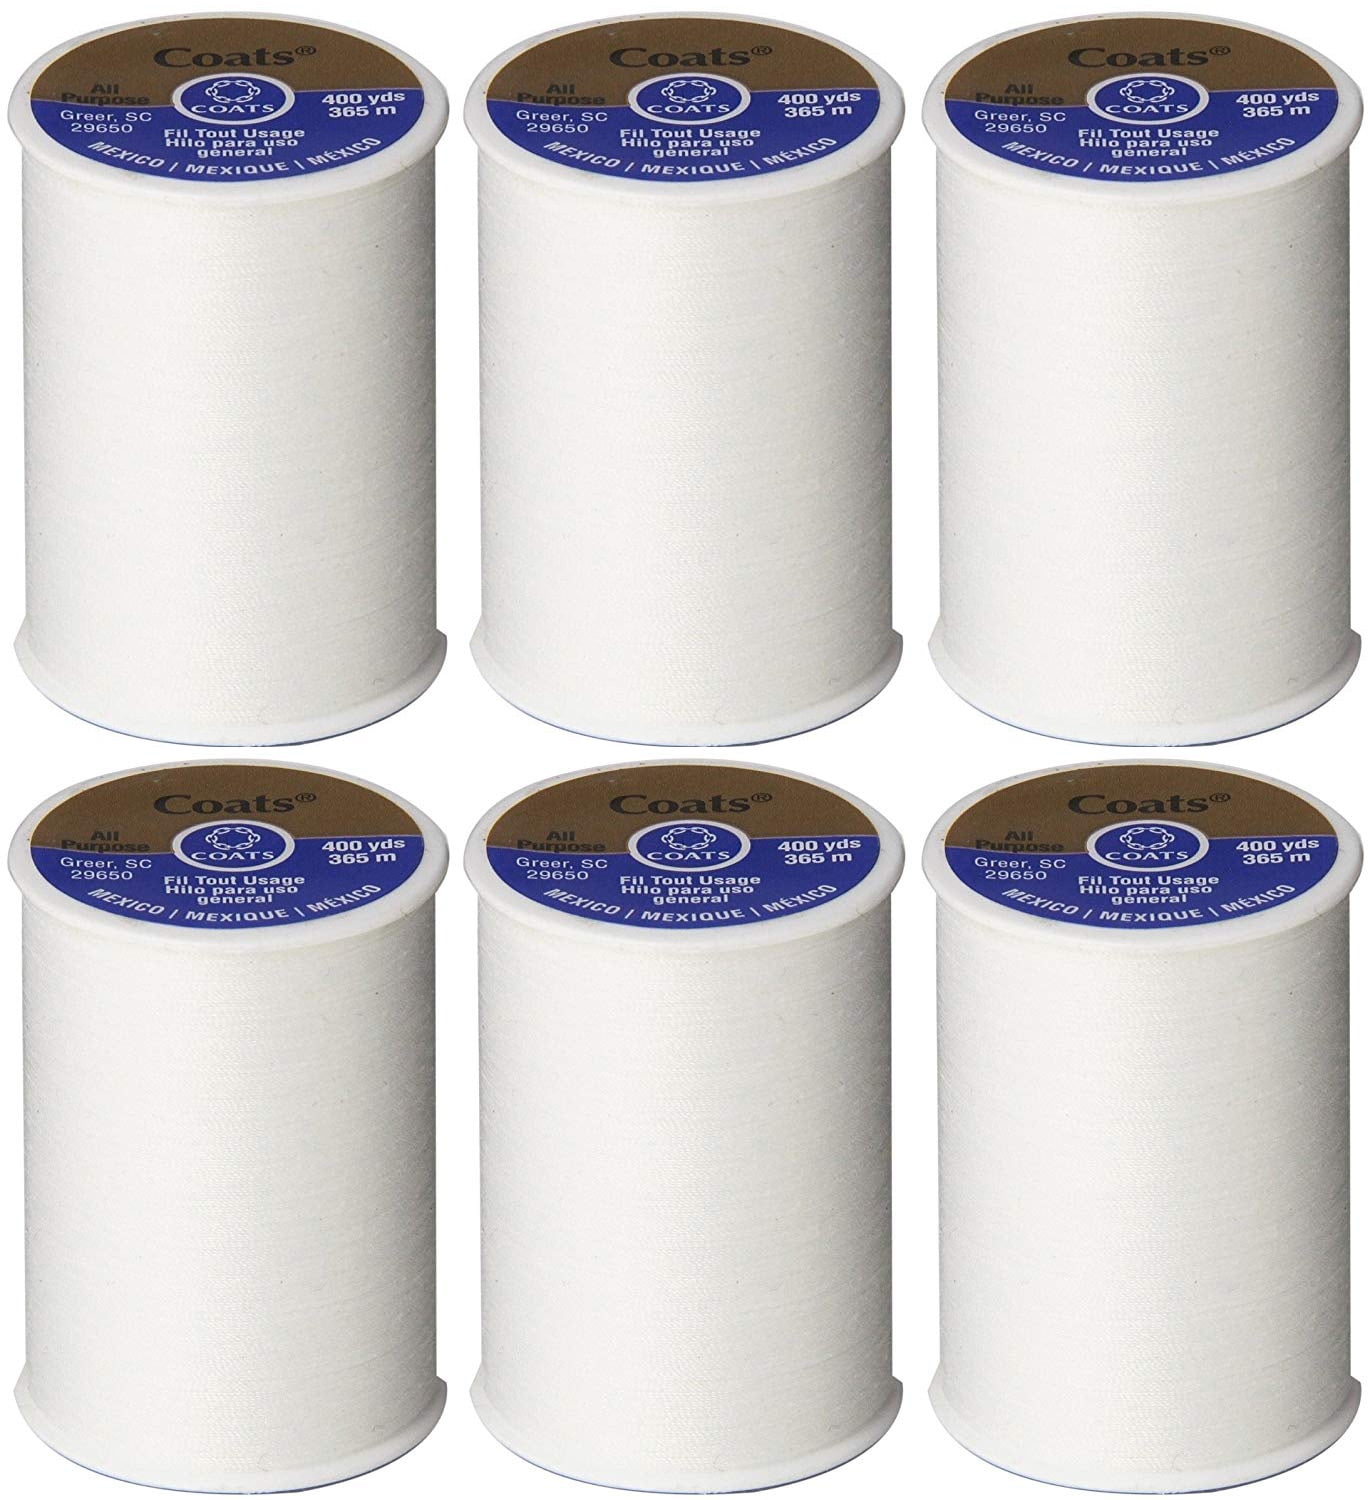 Coats and Clark Dual Duty All Purpose Thread, White (6 Pack) 400yd ...